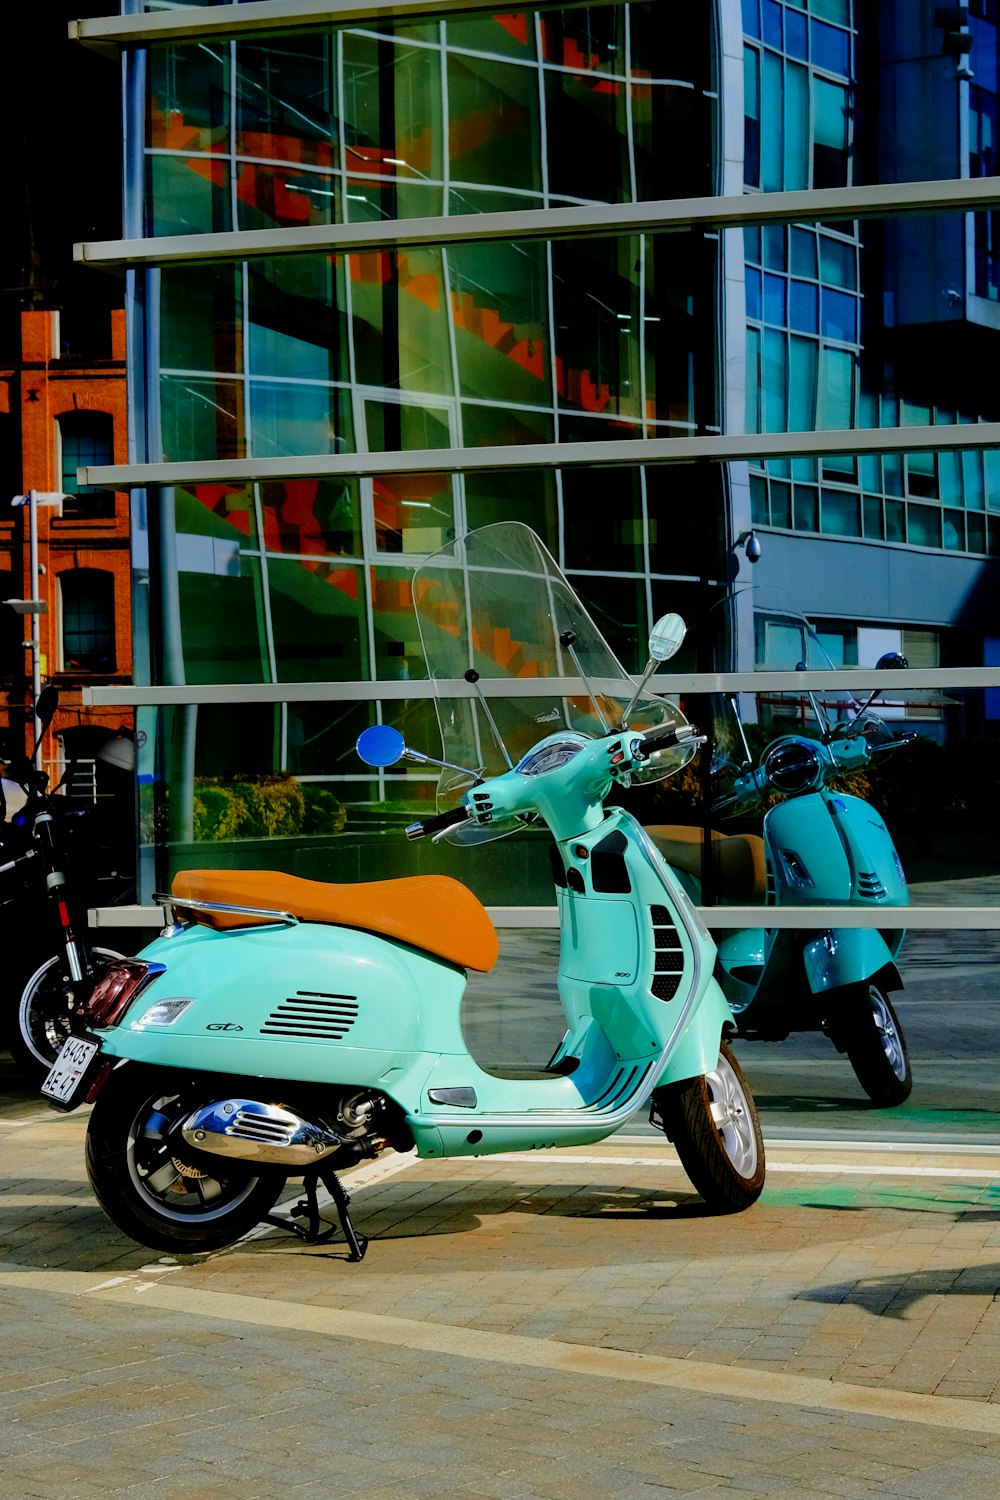 white and blue motor scooter parked beside glass building during daytime